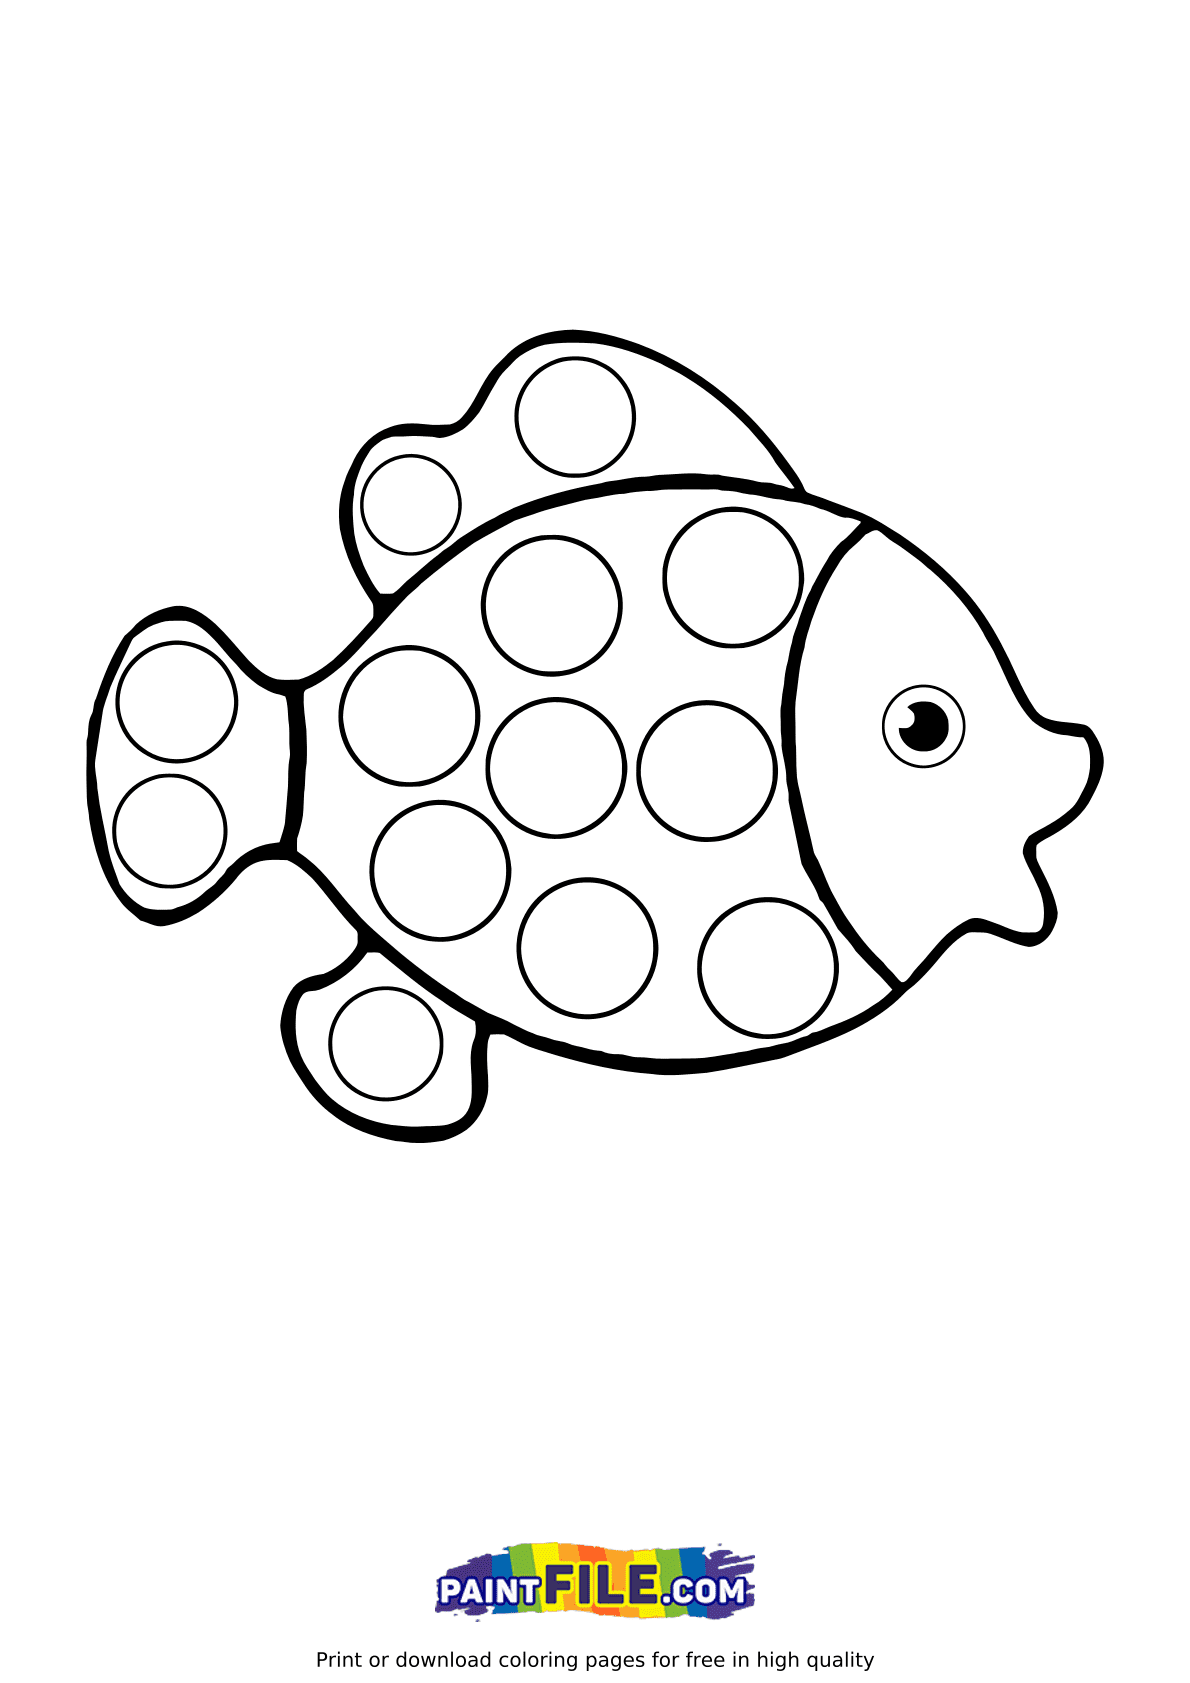 Pop it Gold Fish Coloring Pages